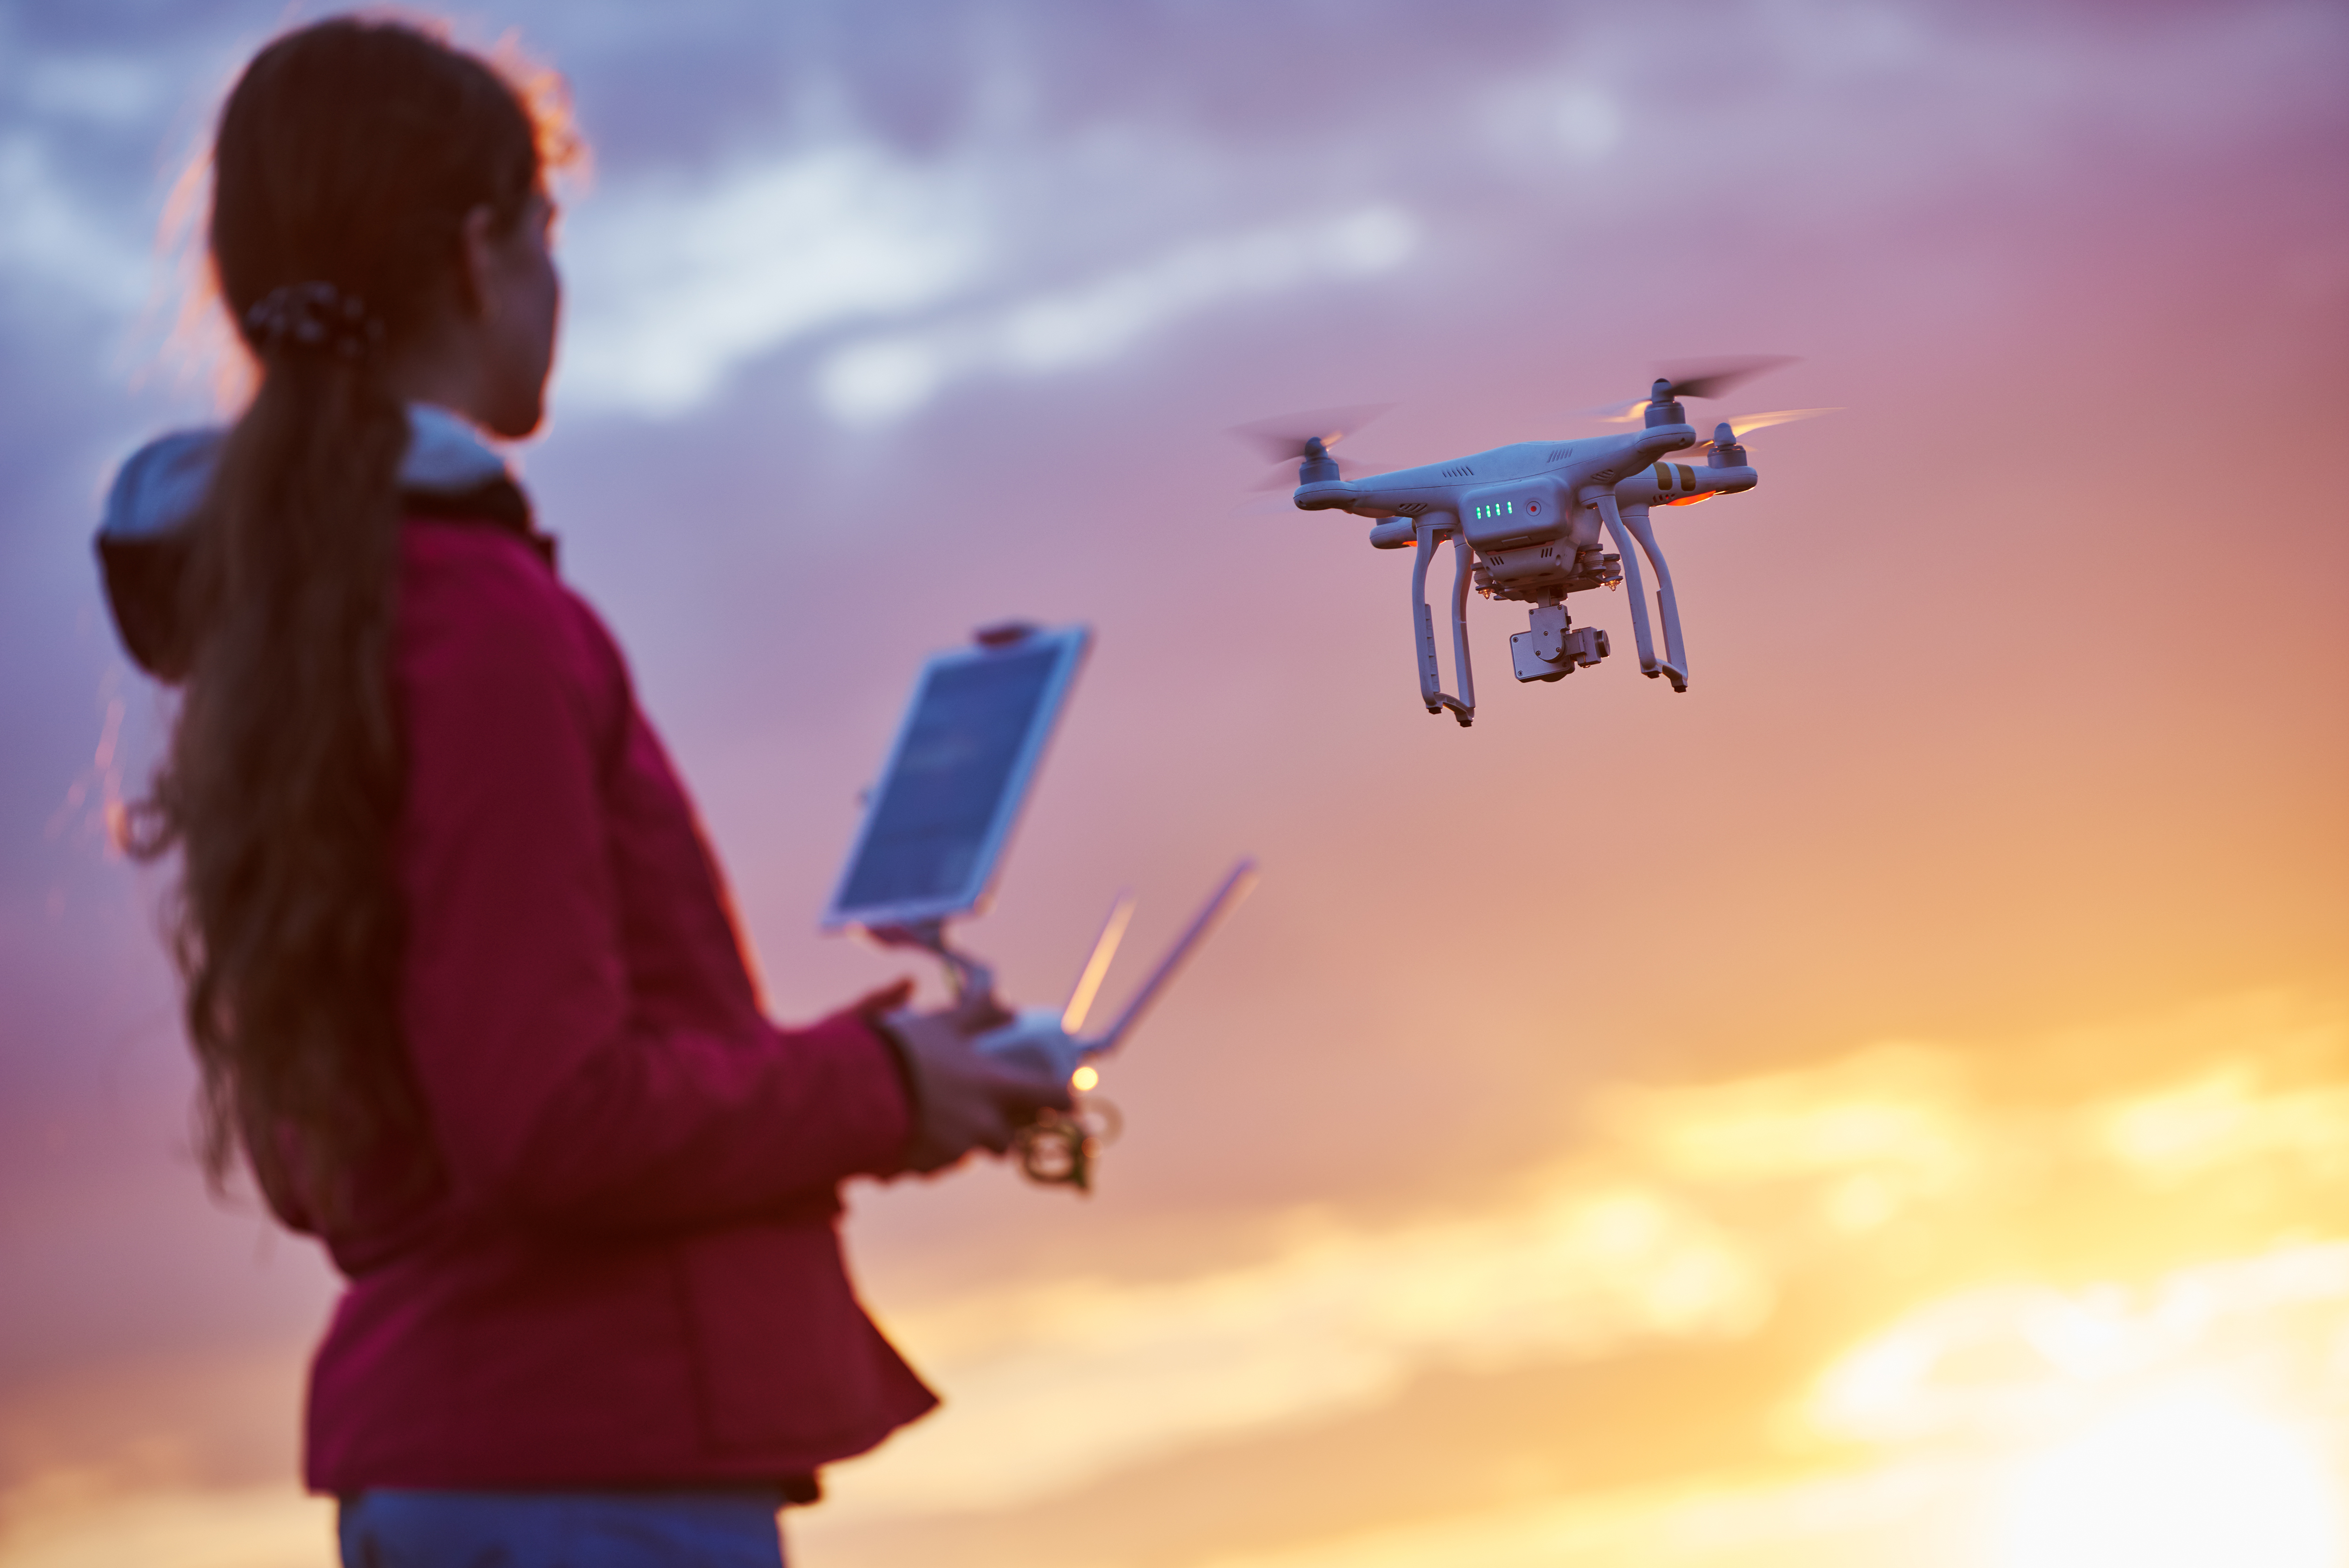 Image - Research by Roehampton academic finds women are under-represented in the drone industry